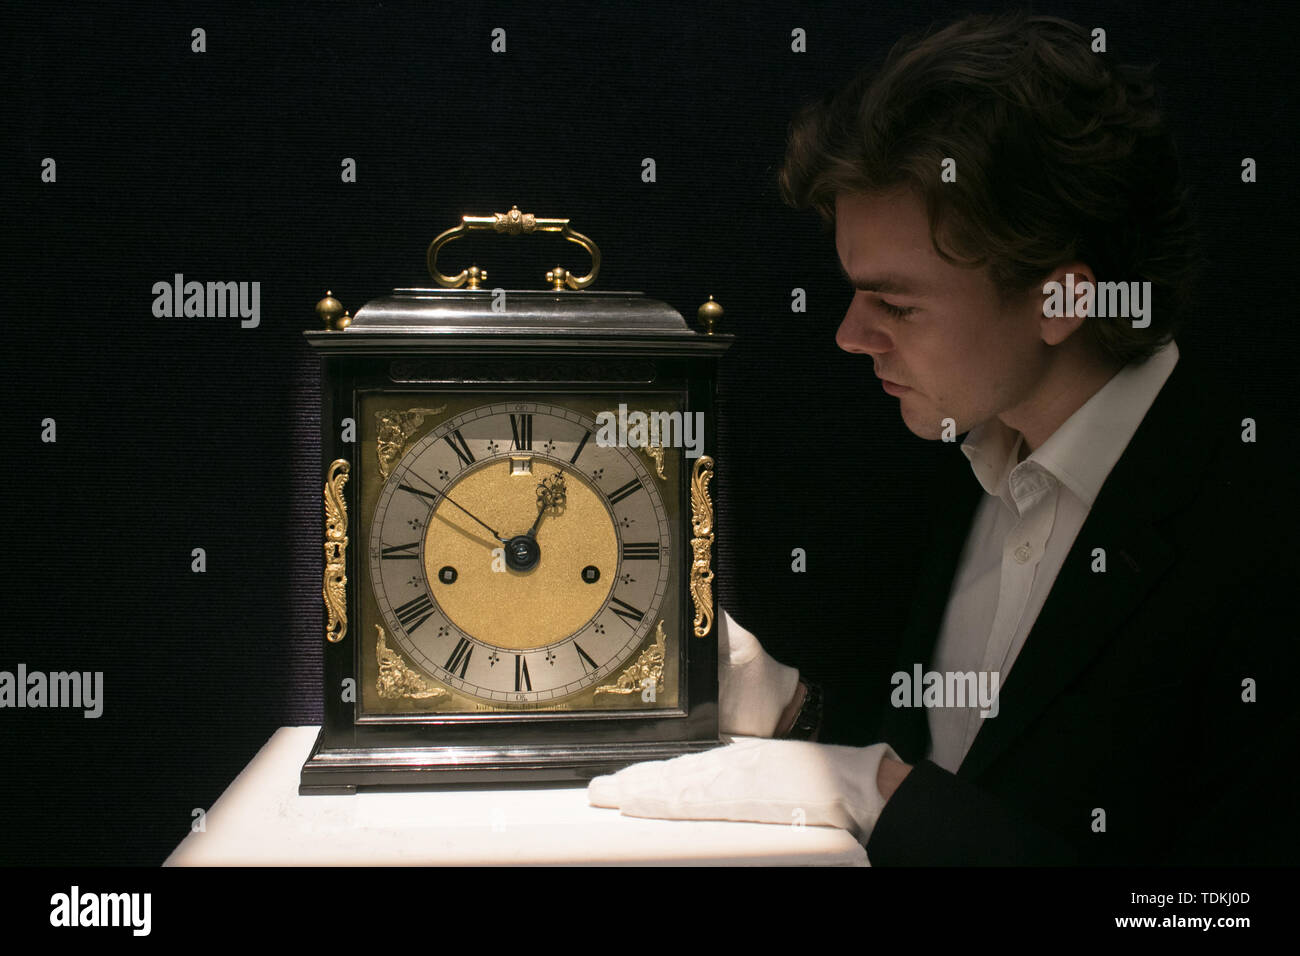 Bonhams London, 17th June 2019. Bonhams photocall of the World's Most valuable clocks from the Clive Collection to appear at auction at Bonhams New Bond Street Credit: amer ghazzal/Alamy Live News Stock Photo